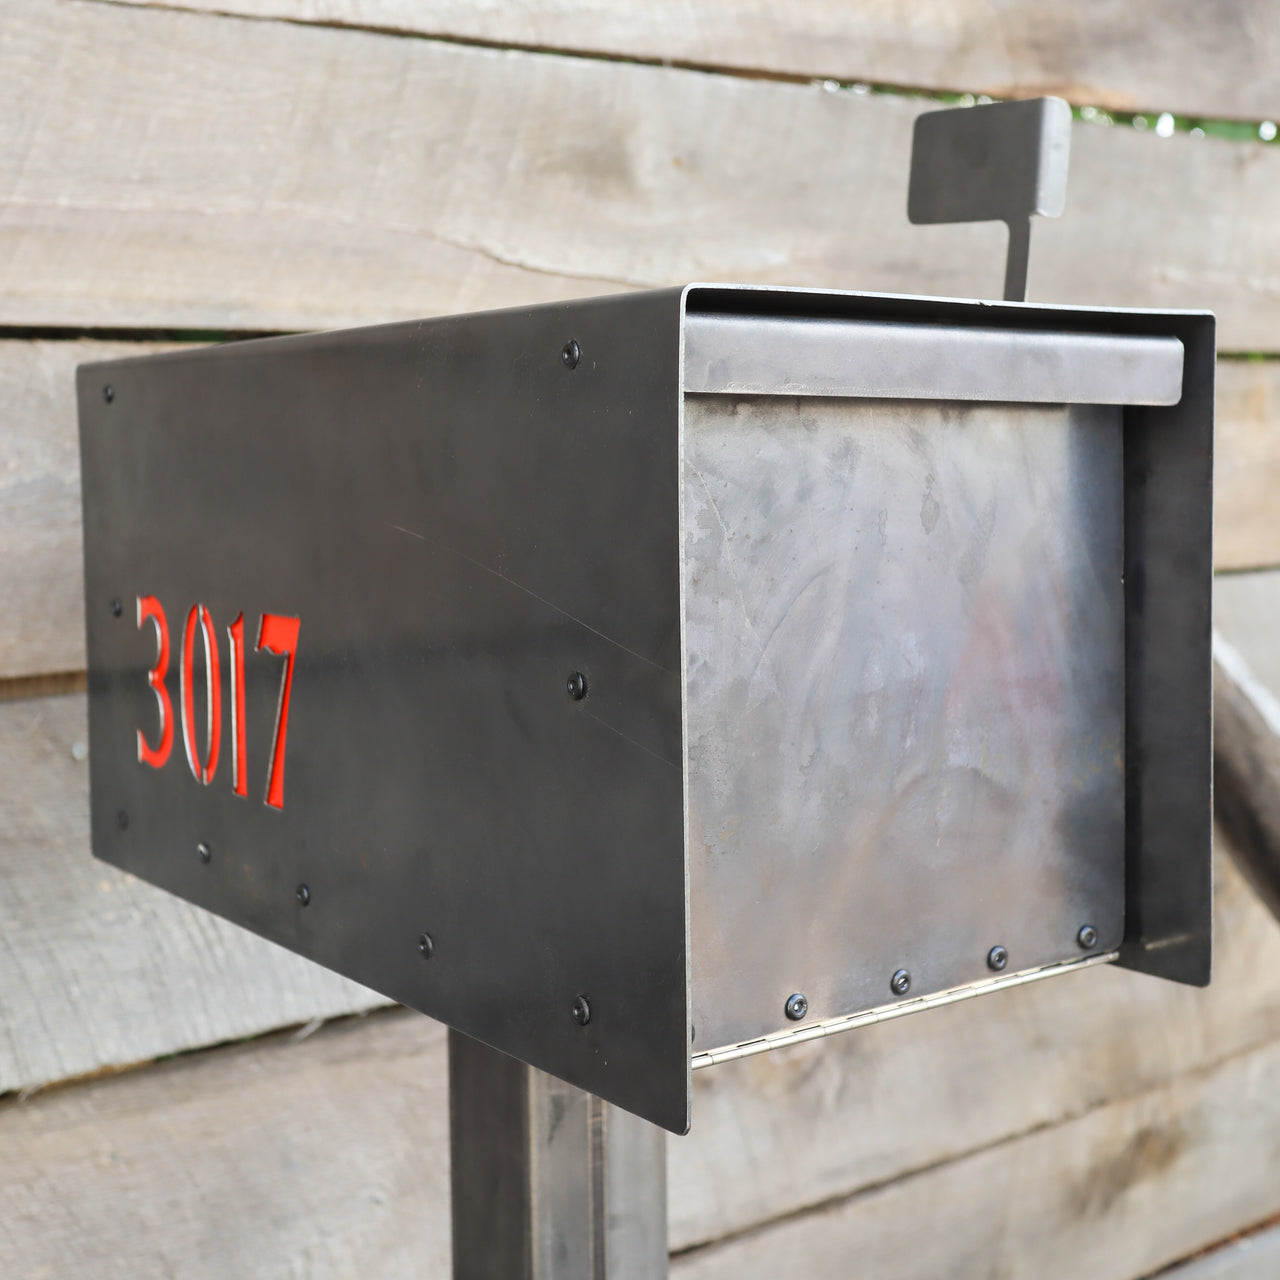 Modern Steel Mailbox - Metal Address Mail Box with Personalized Numbers - Letter Box Post